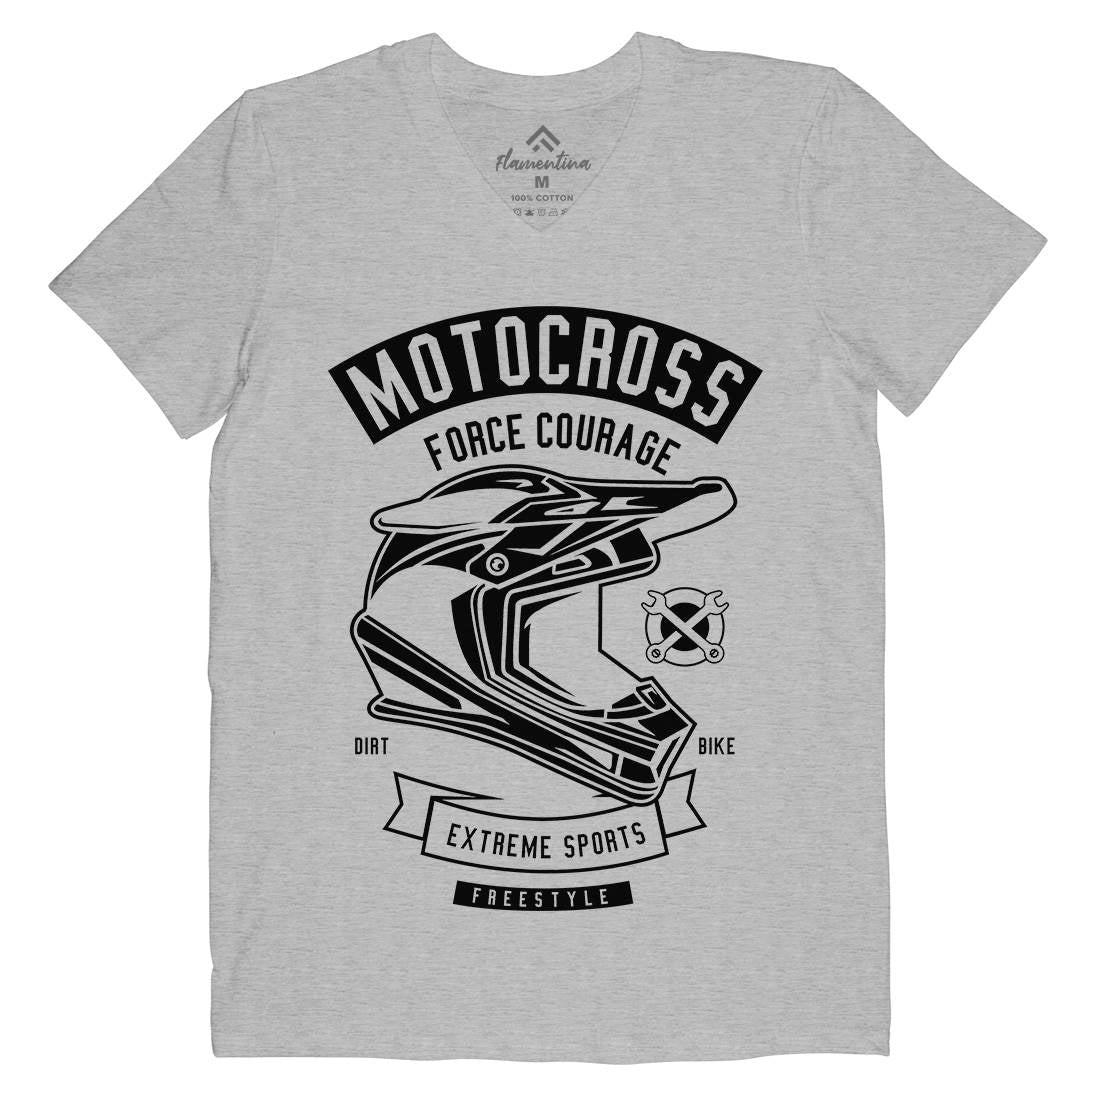 Motocross Force Courage Mens V-Neck T-Shirt Motorcycles B576